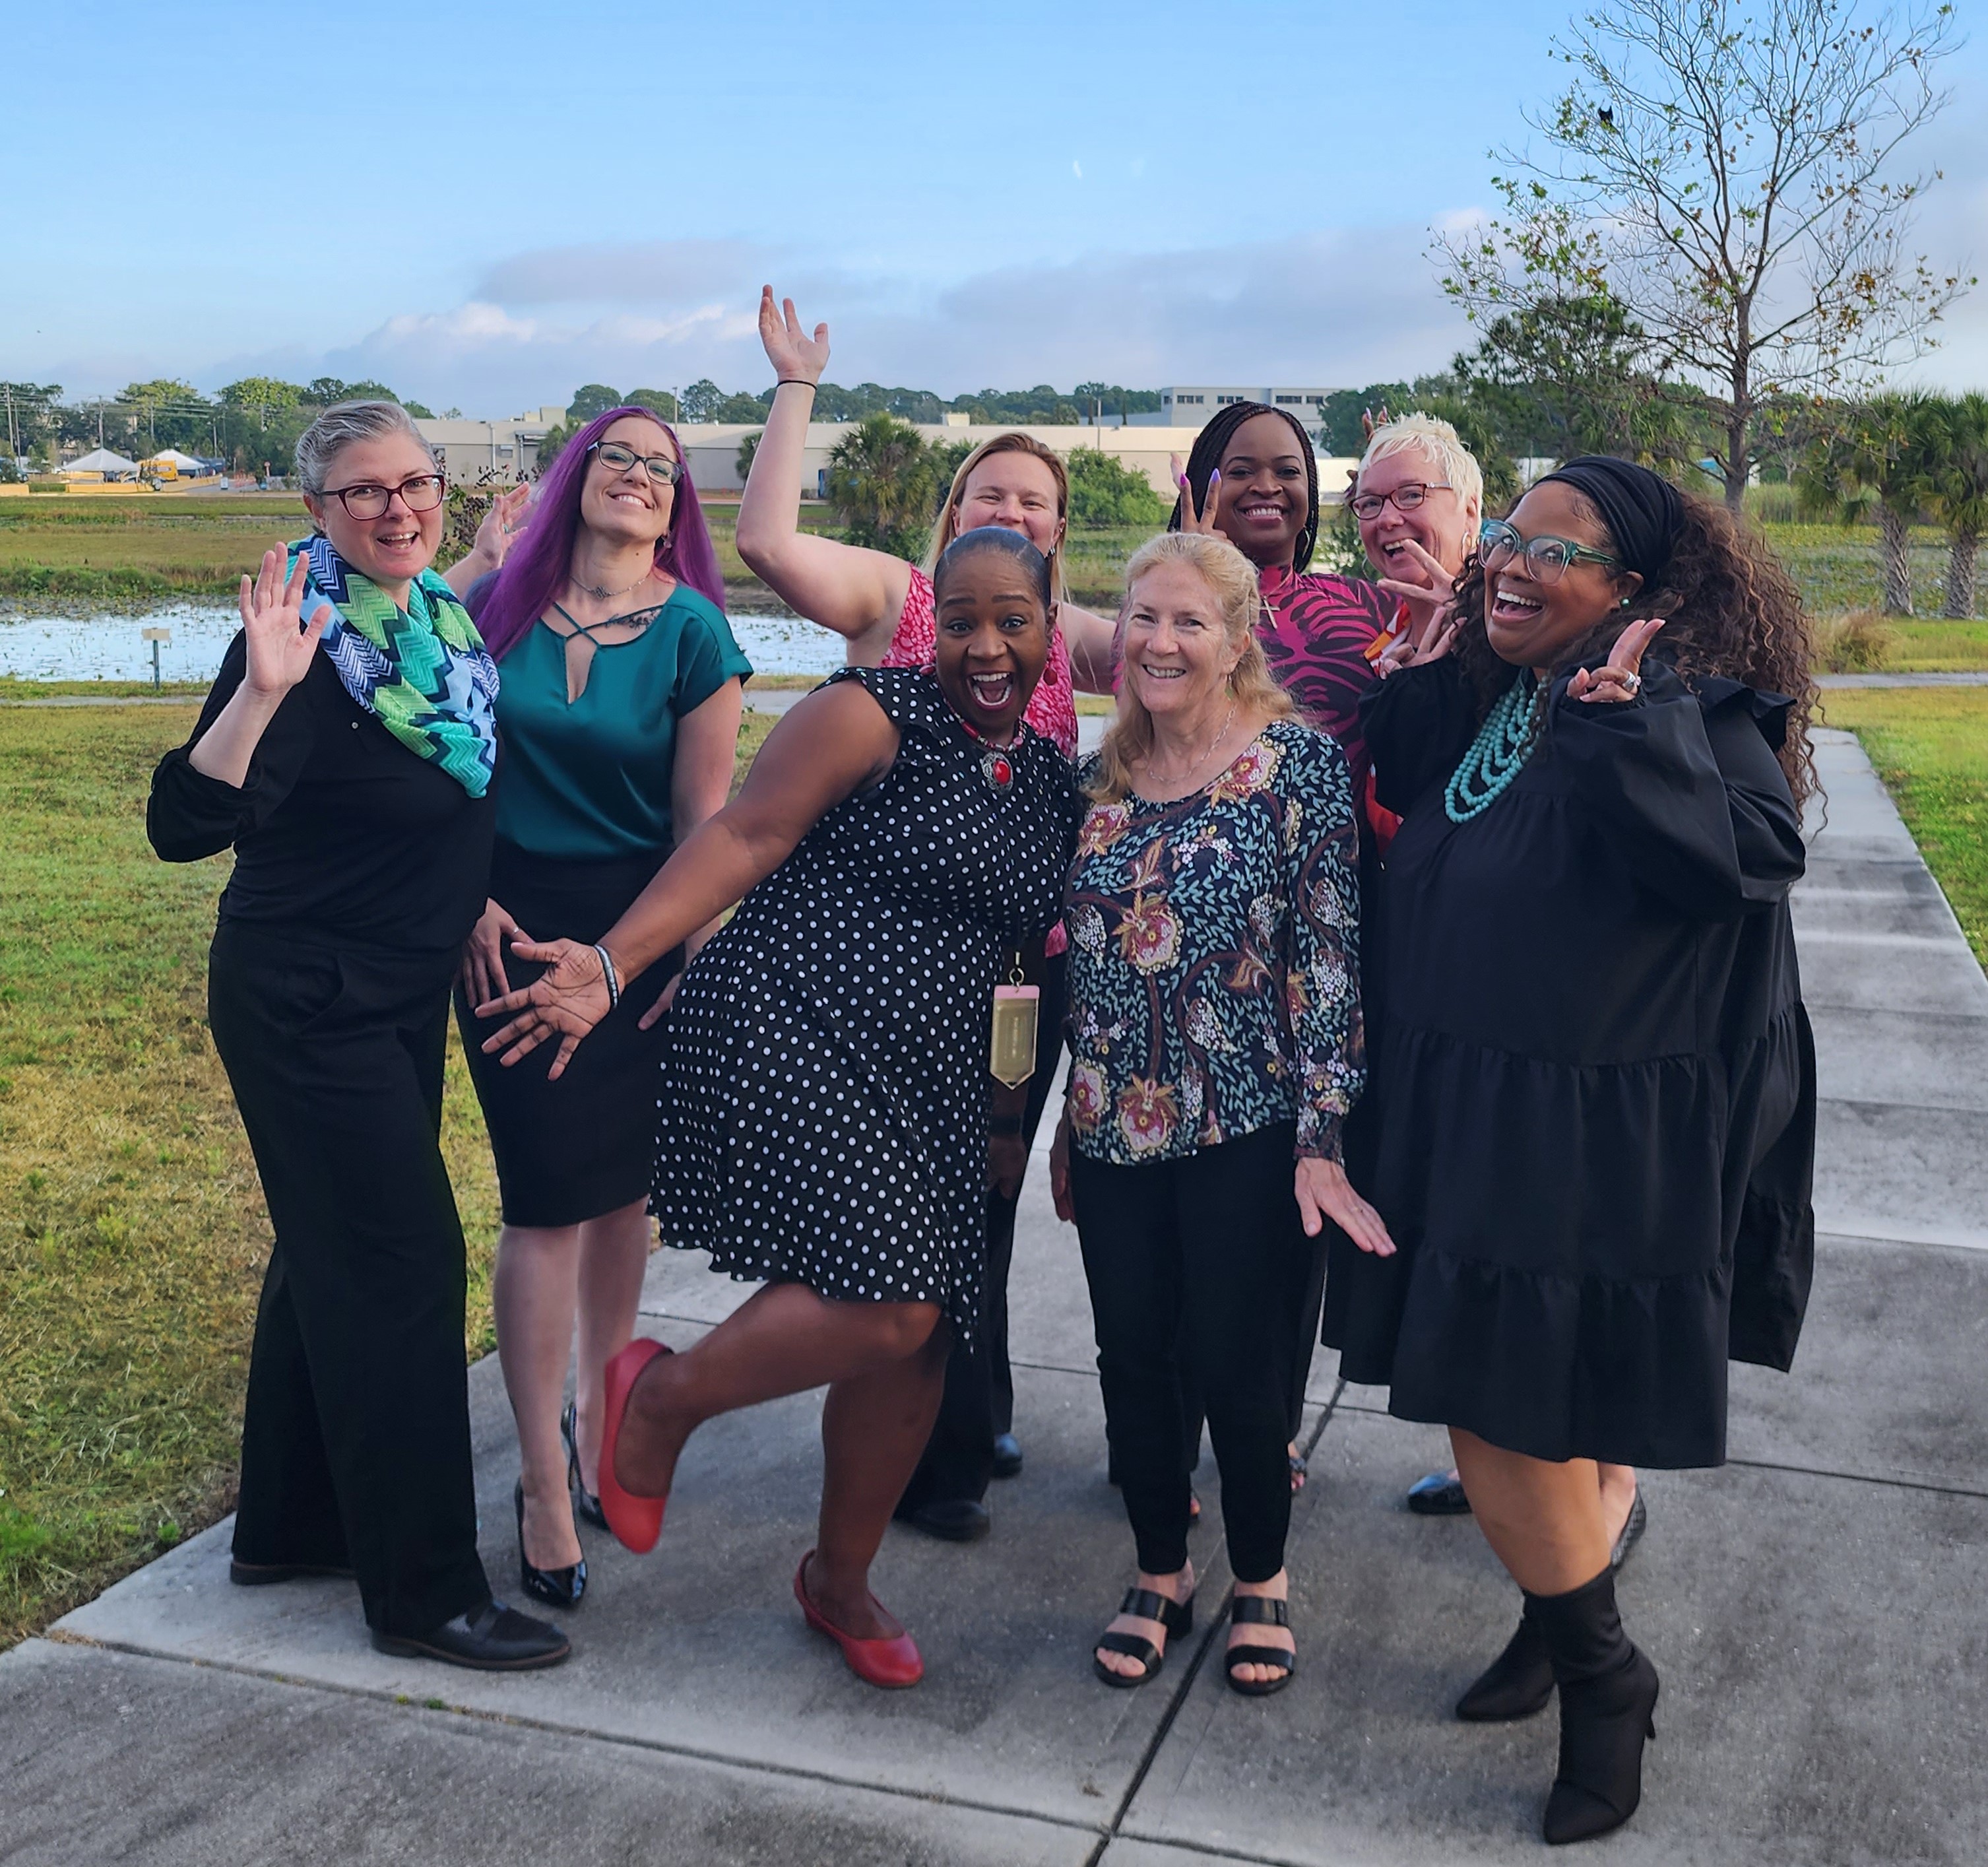 The amazing women of the PSTA HR department poses together